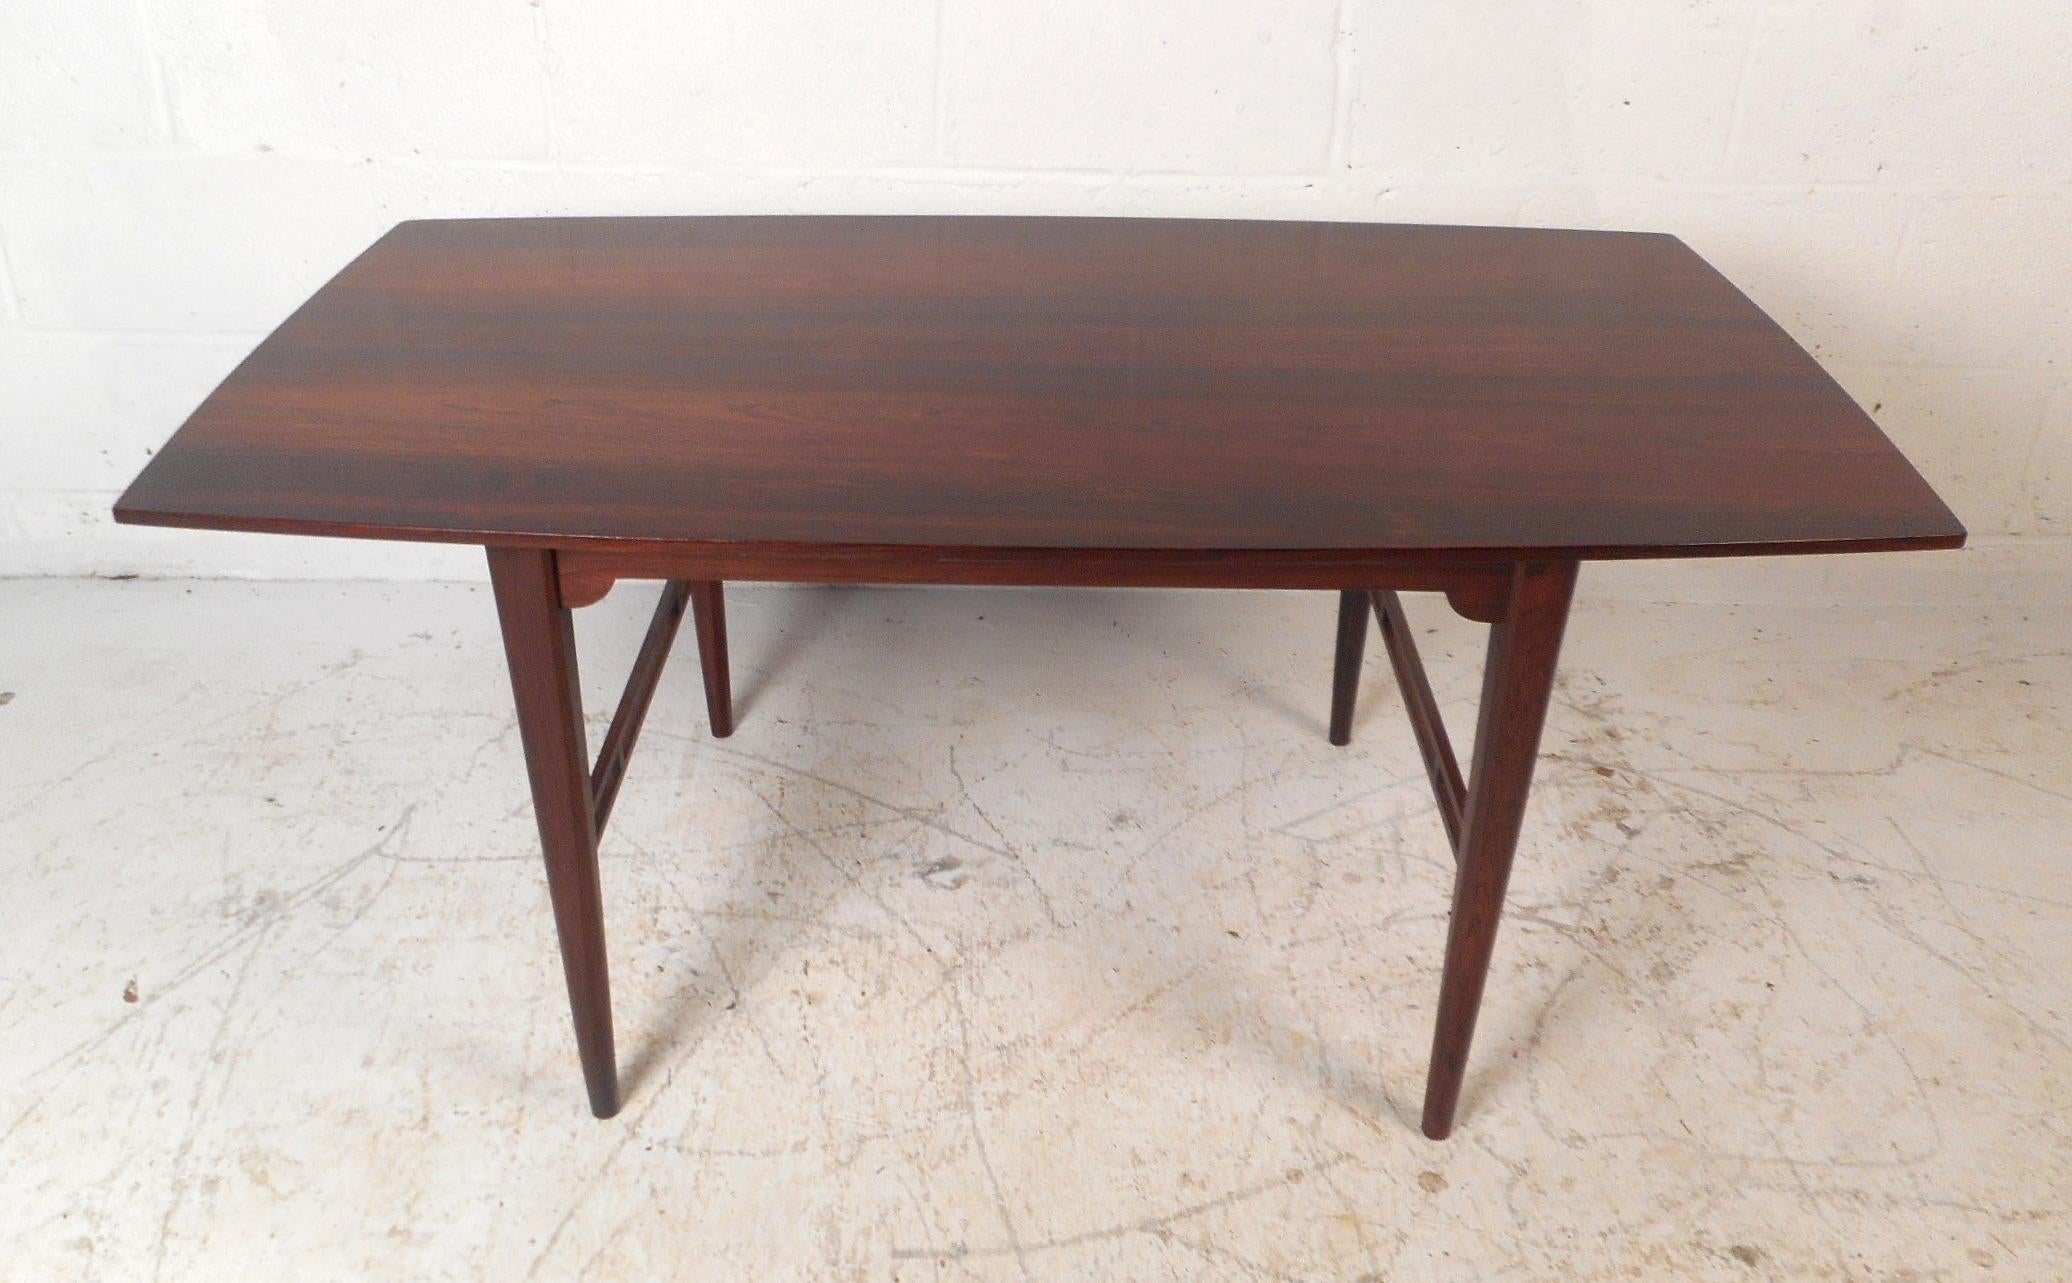 A beautiful vintage modern coffee table with uniquely shaped tapered legs and elegant rosewood wood grain. This Sleek Danish modern coffee table features an unusually shaped top and sculpted stretchers on each side. This wonderful coffee table makes